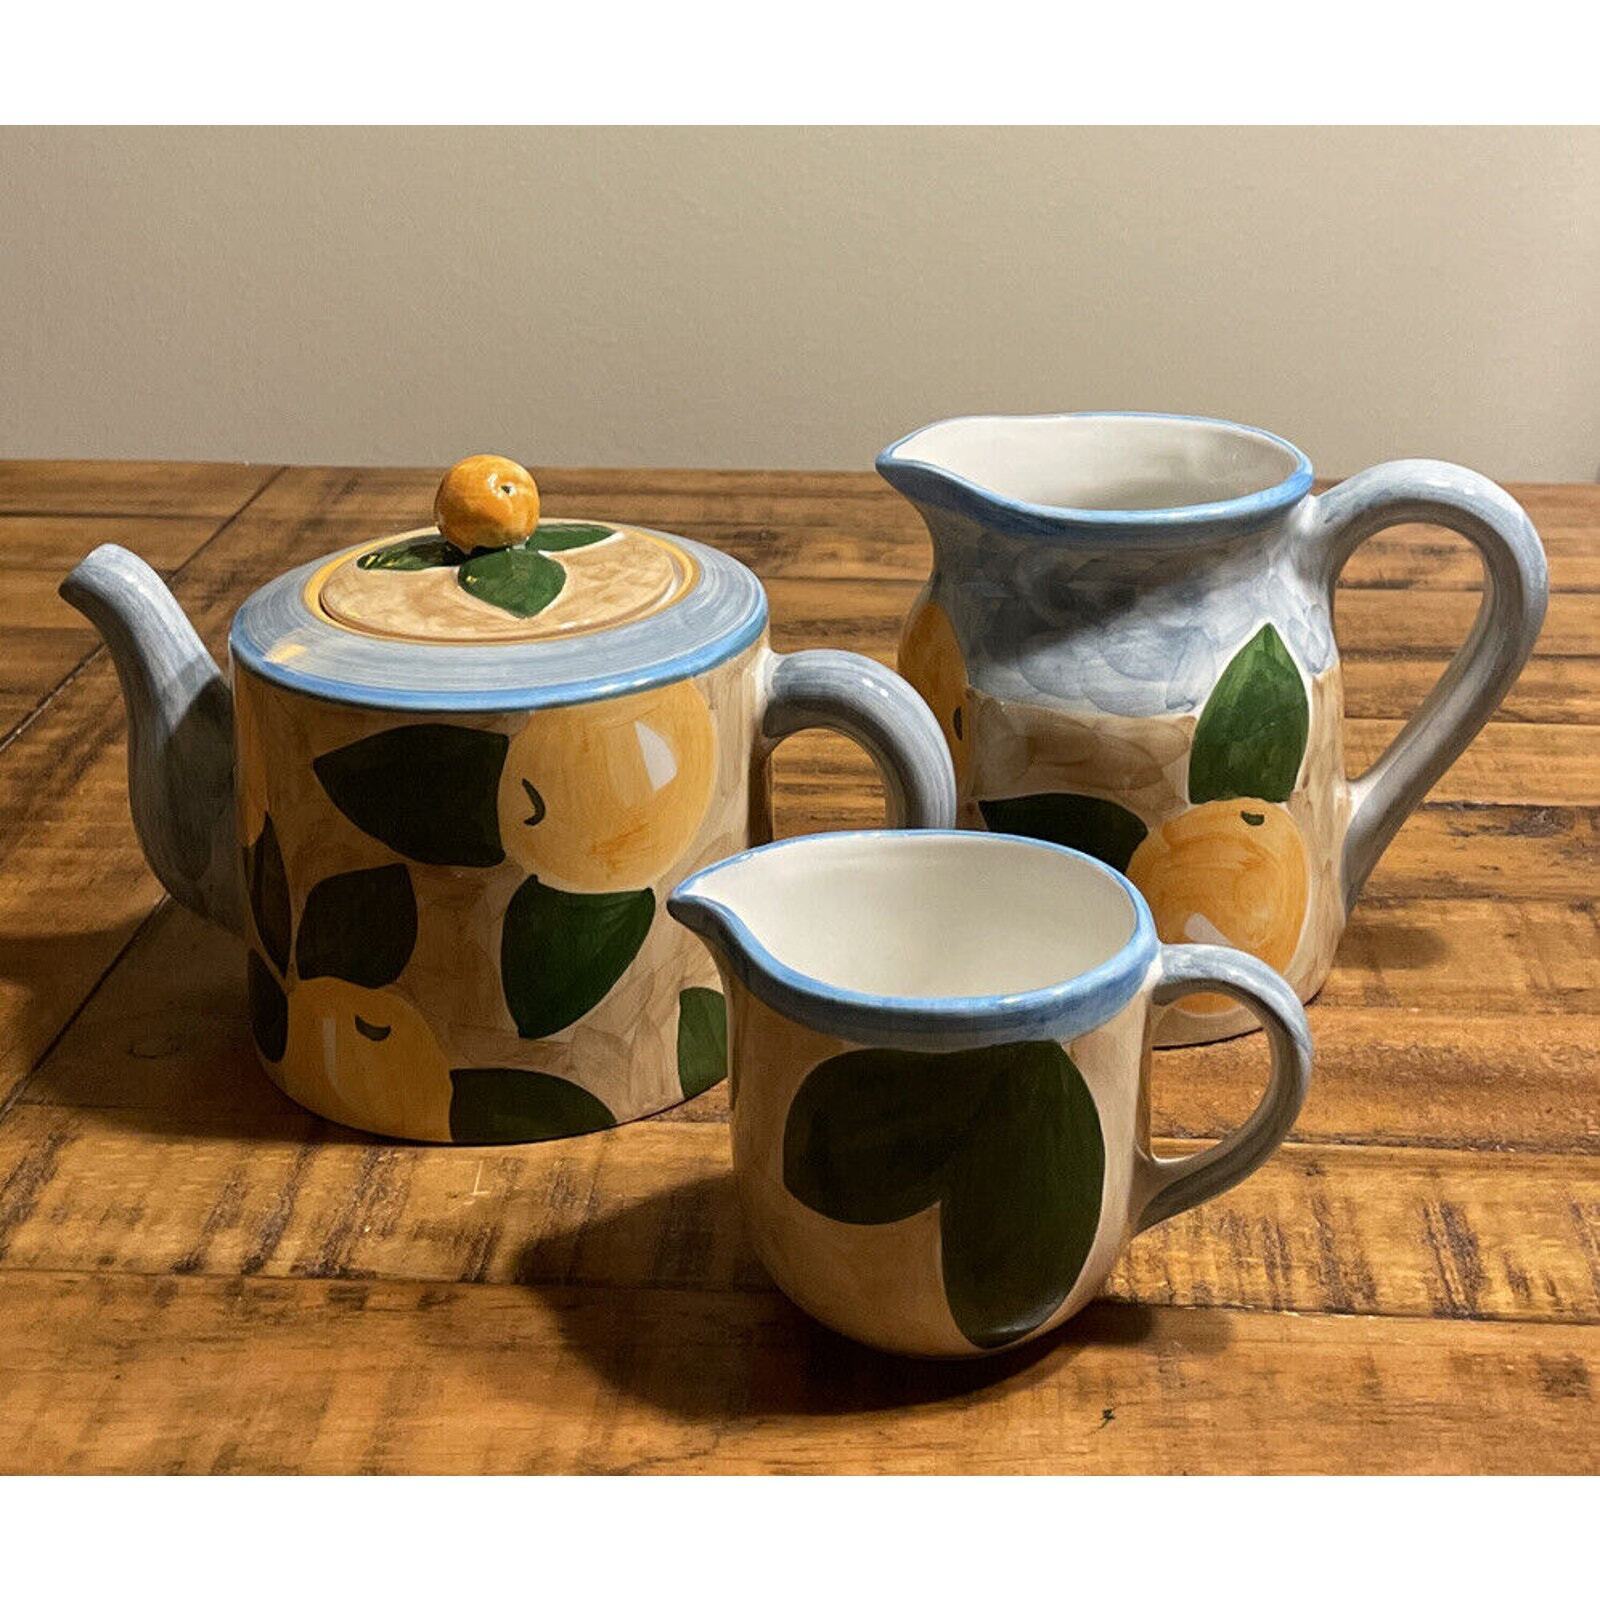 Villeroy and Boch tea set with pot w/lid, creamer, and jar/pitcher. Mint 🍊🍃